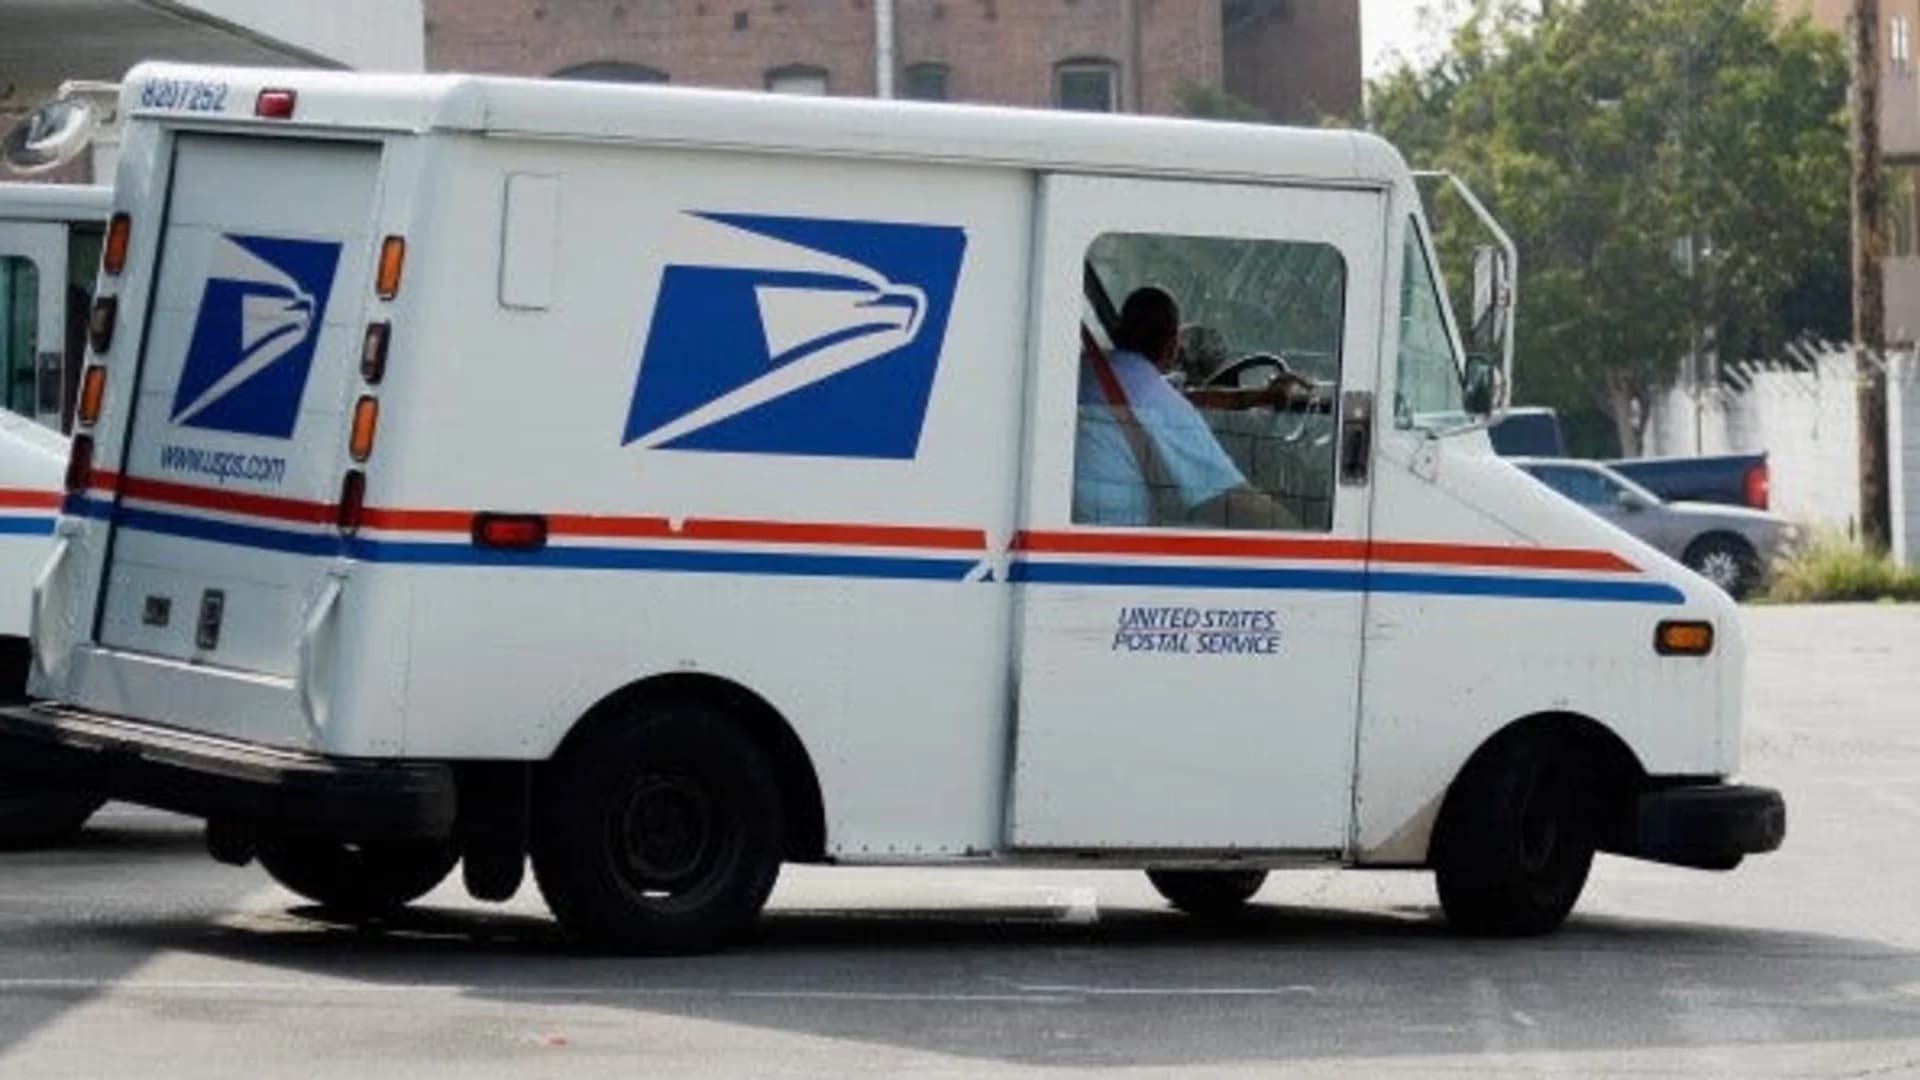 Postal worker leaves mail on side of road, quits job